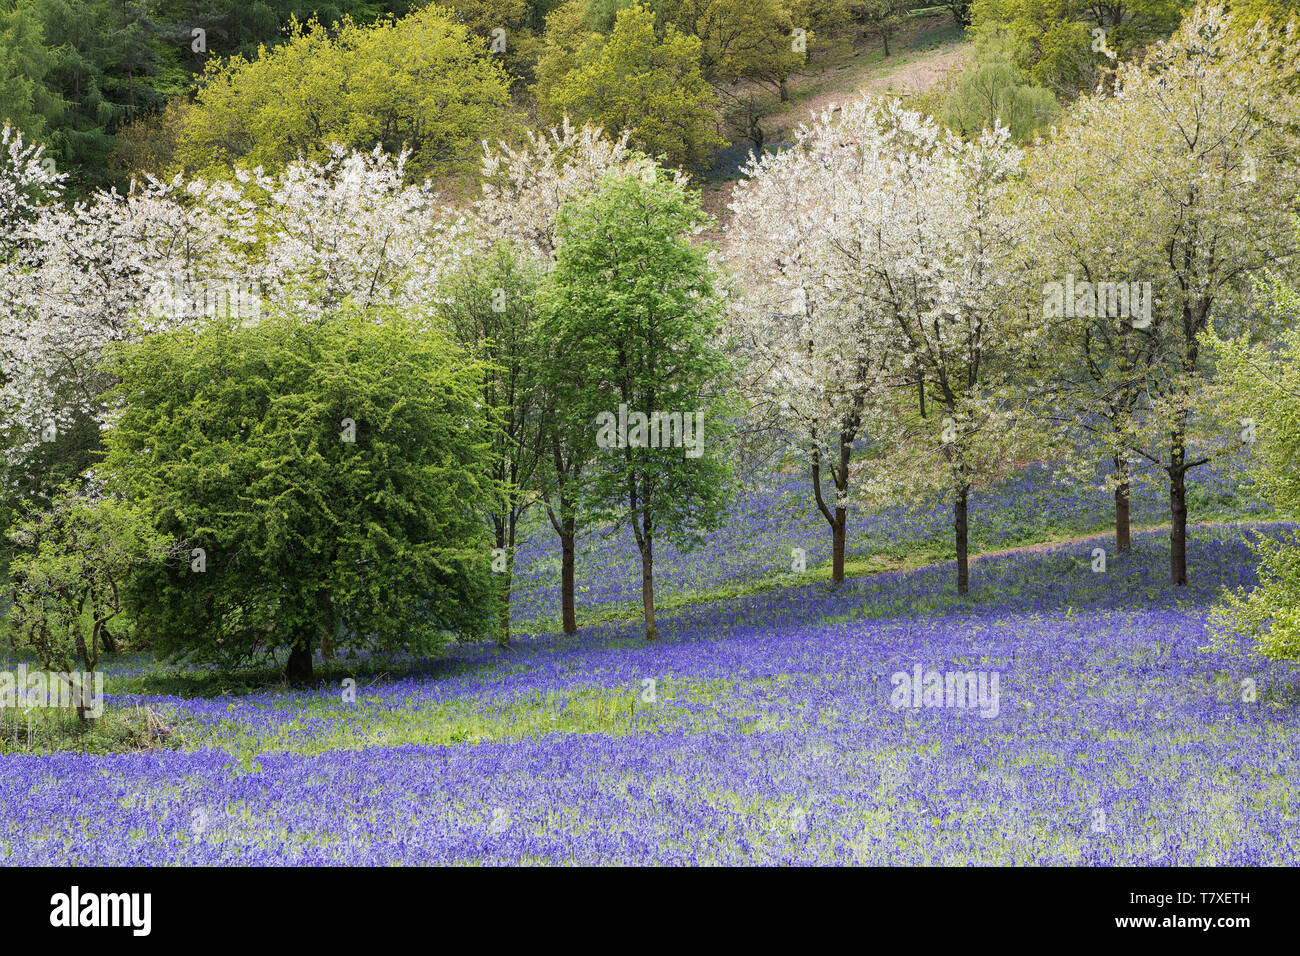 Valley of bluebells with flowering trees on a sloping hillside Stock Photo